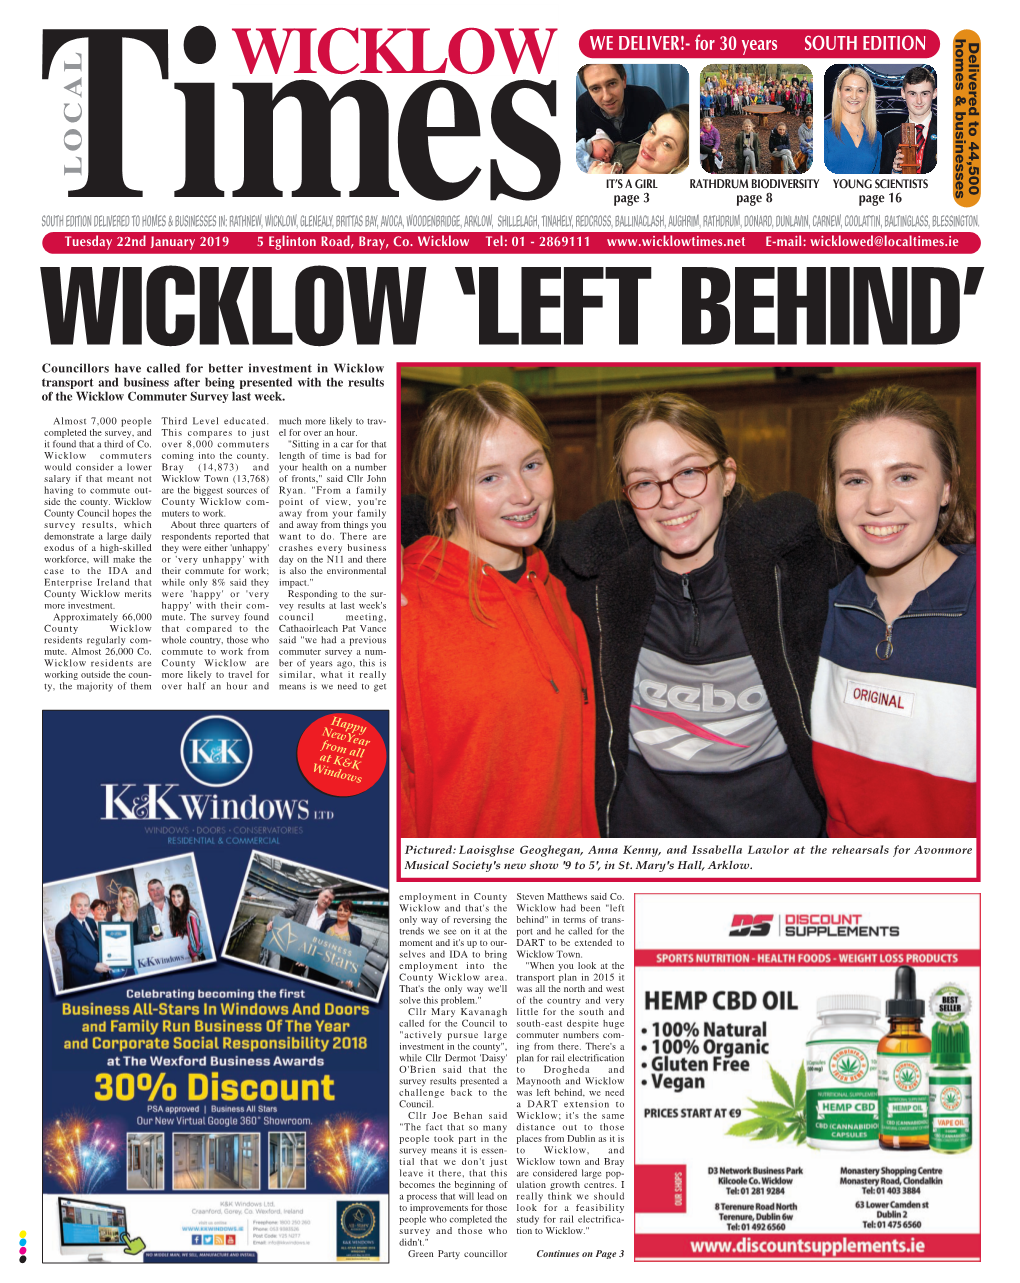 Wicklow Times 22-1-19 South